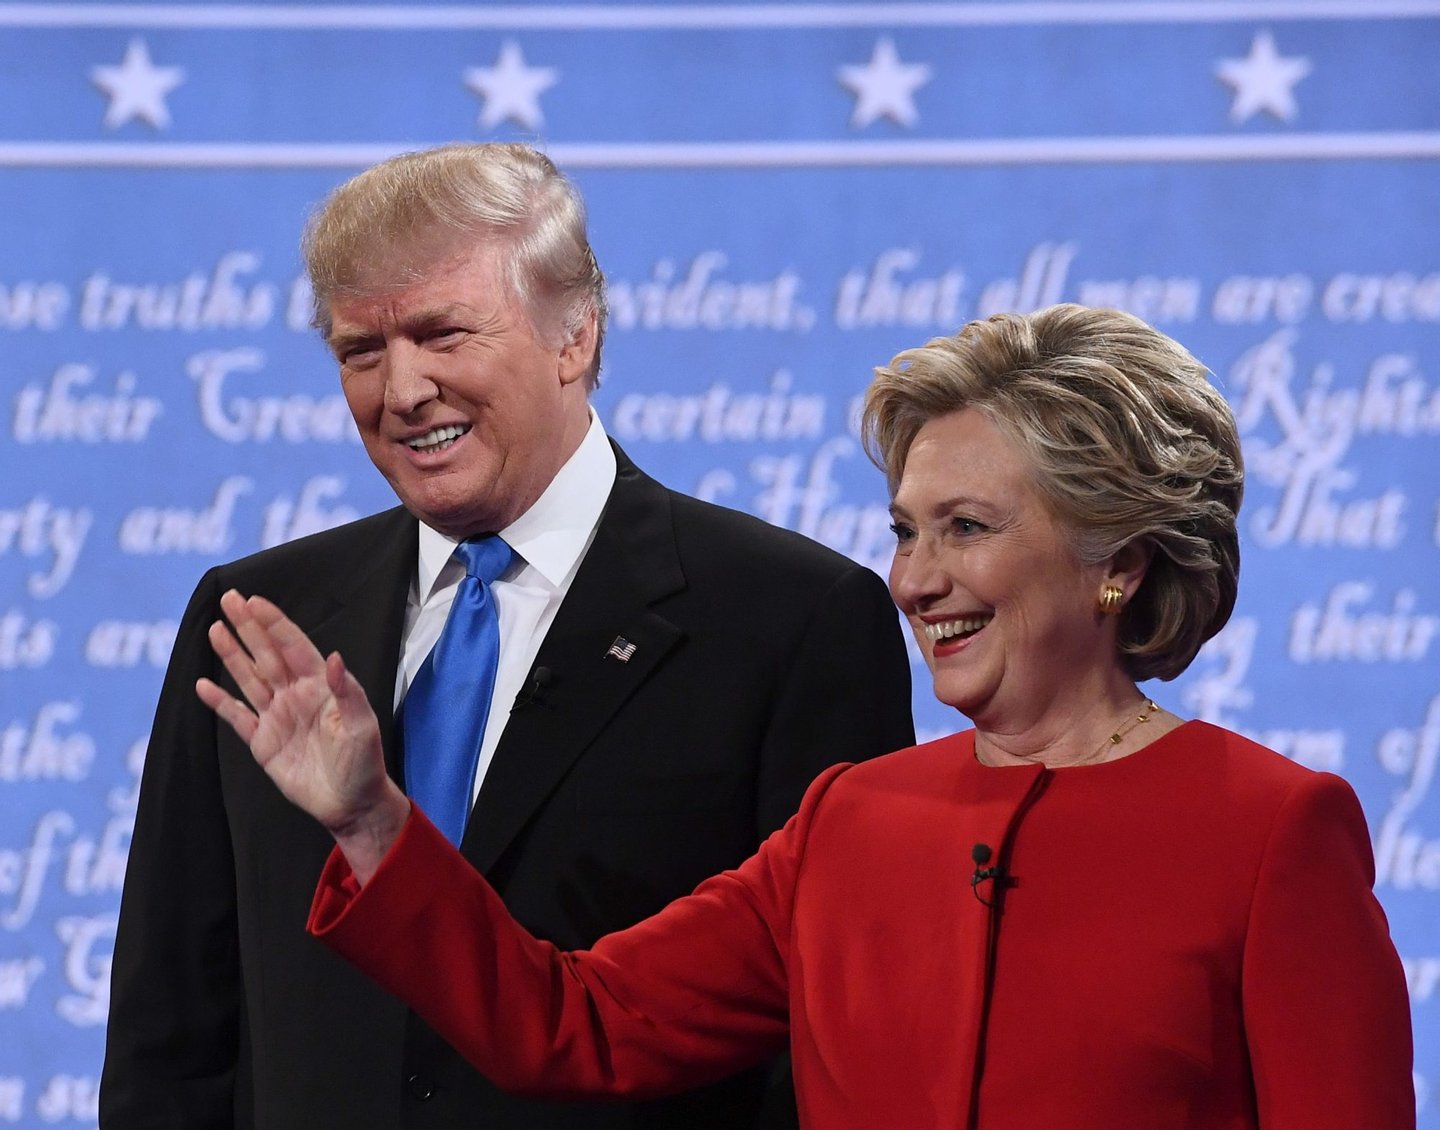 Republican nominee Donald Trump (L) and Democratic nominee Hillary Clinton arrive for the first presidential debate at Hofstra University in Hempstead, New York on September 26, 2016. / AFP / Jewel SAMAD        (Photo credit should read JEWEL SAMAD/AFP/Getty Images)